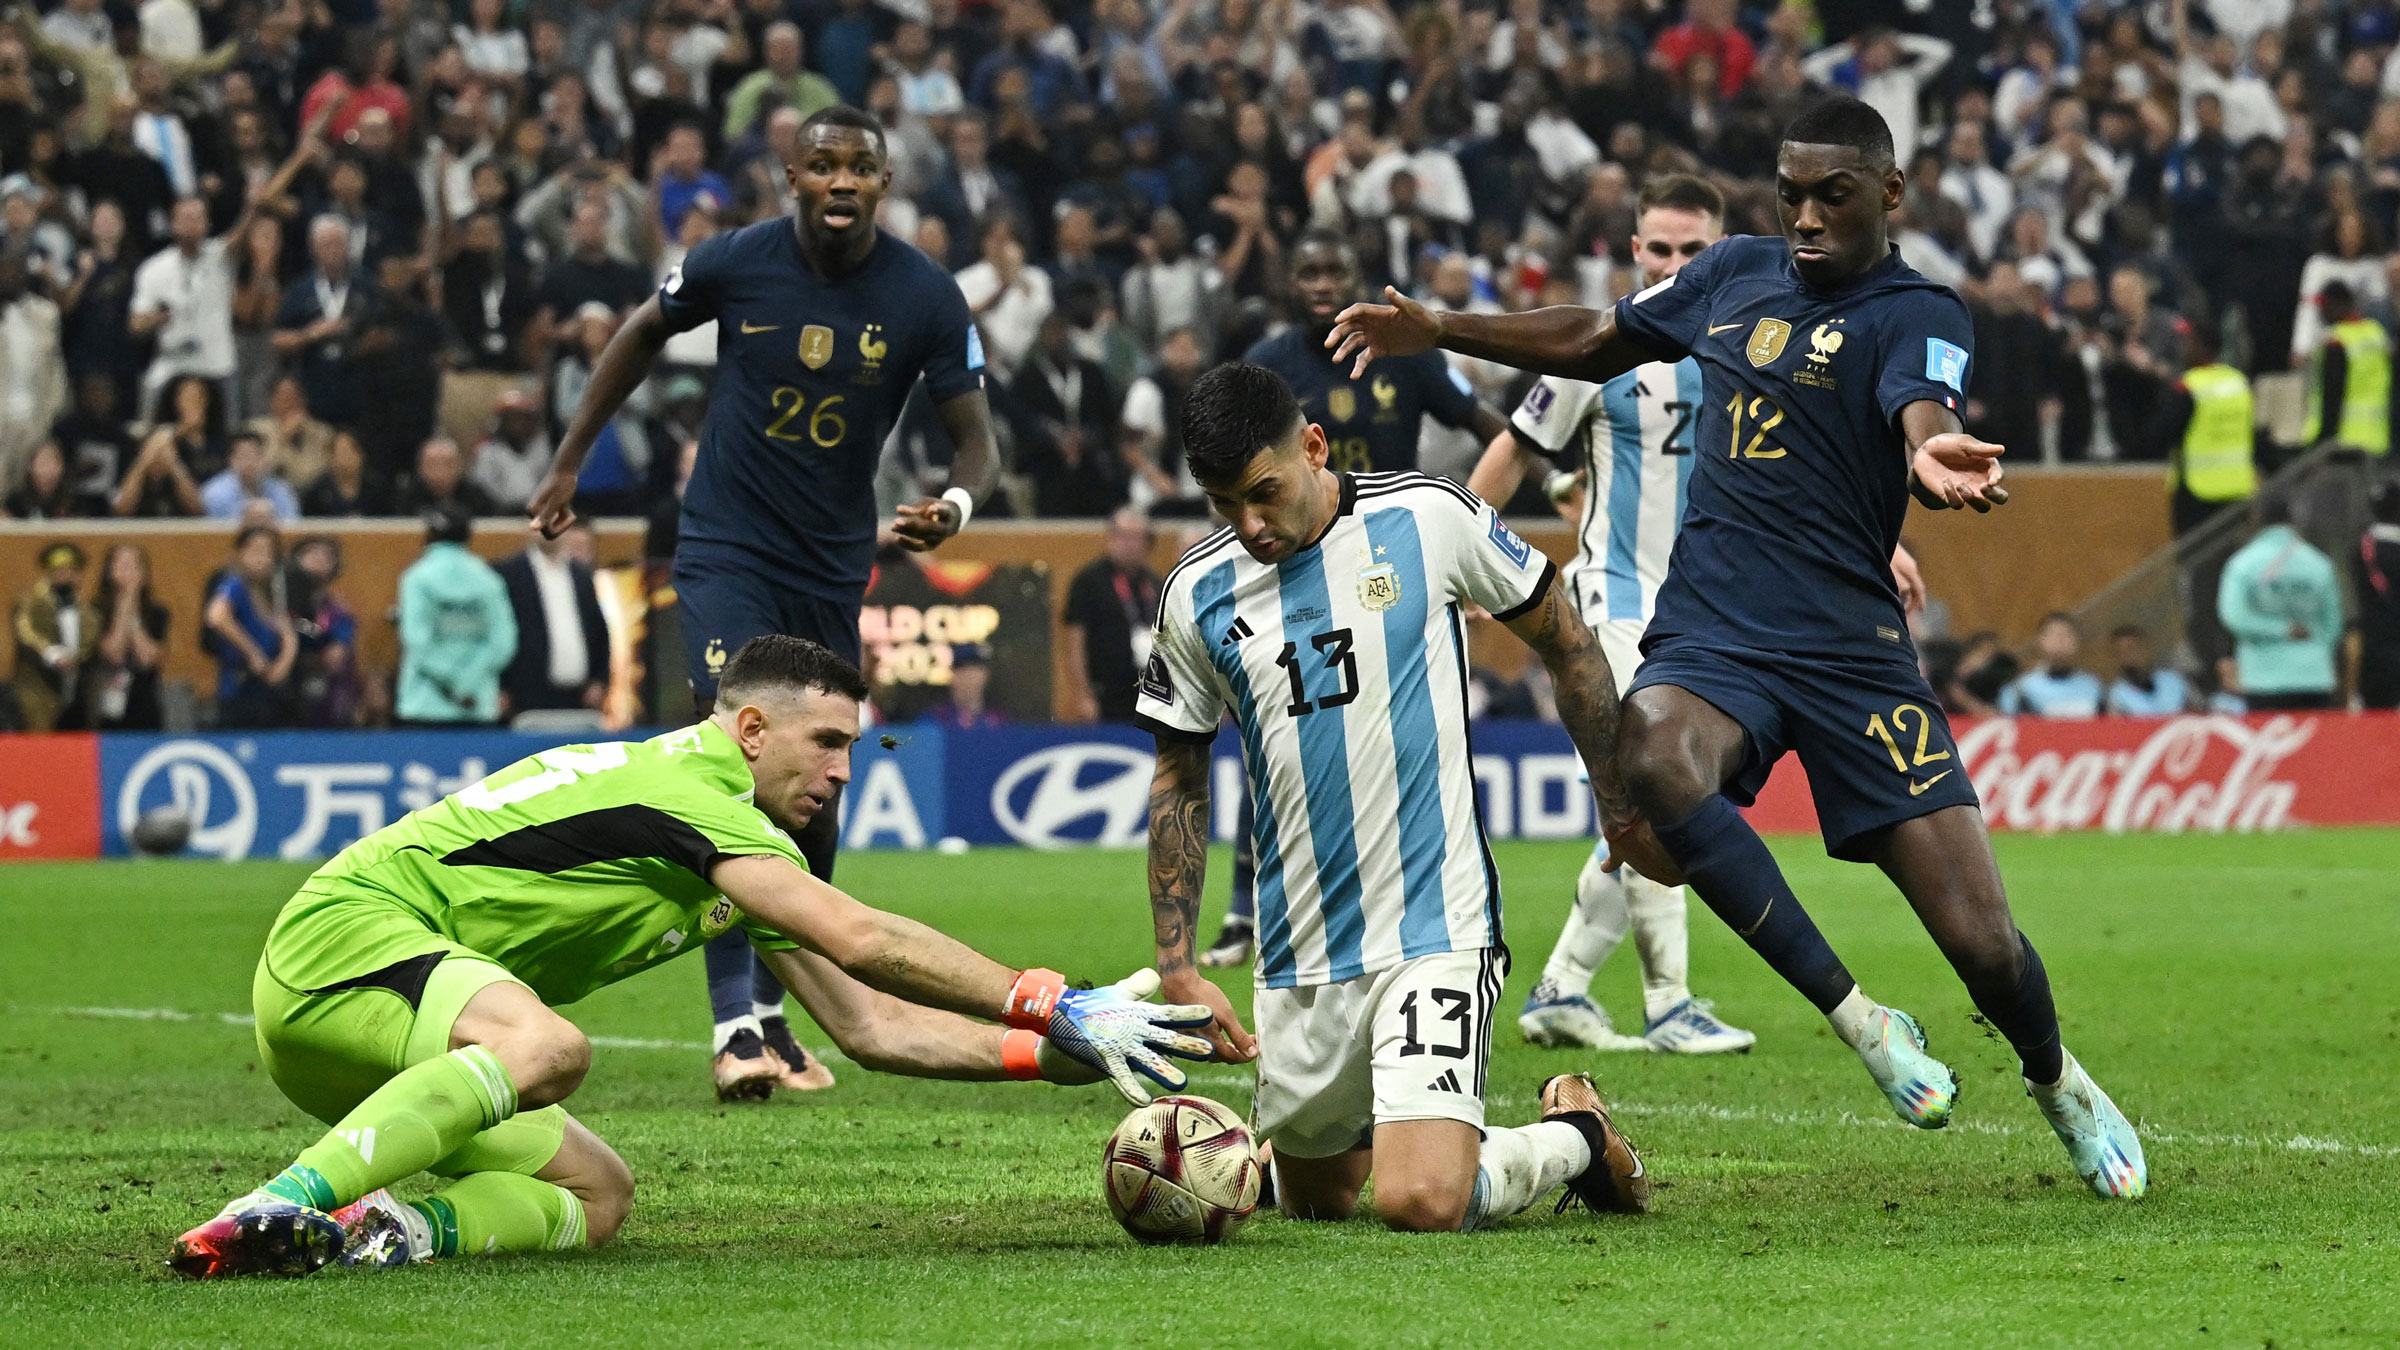 Argentina goalkeeper Emiliano Martinez secures the ball late in the second half.